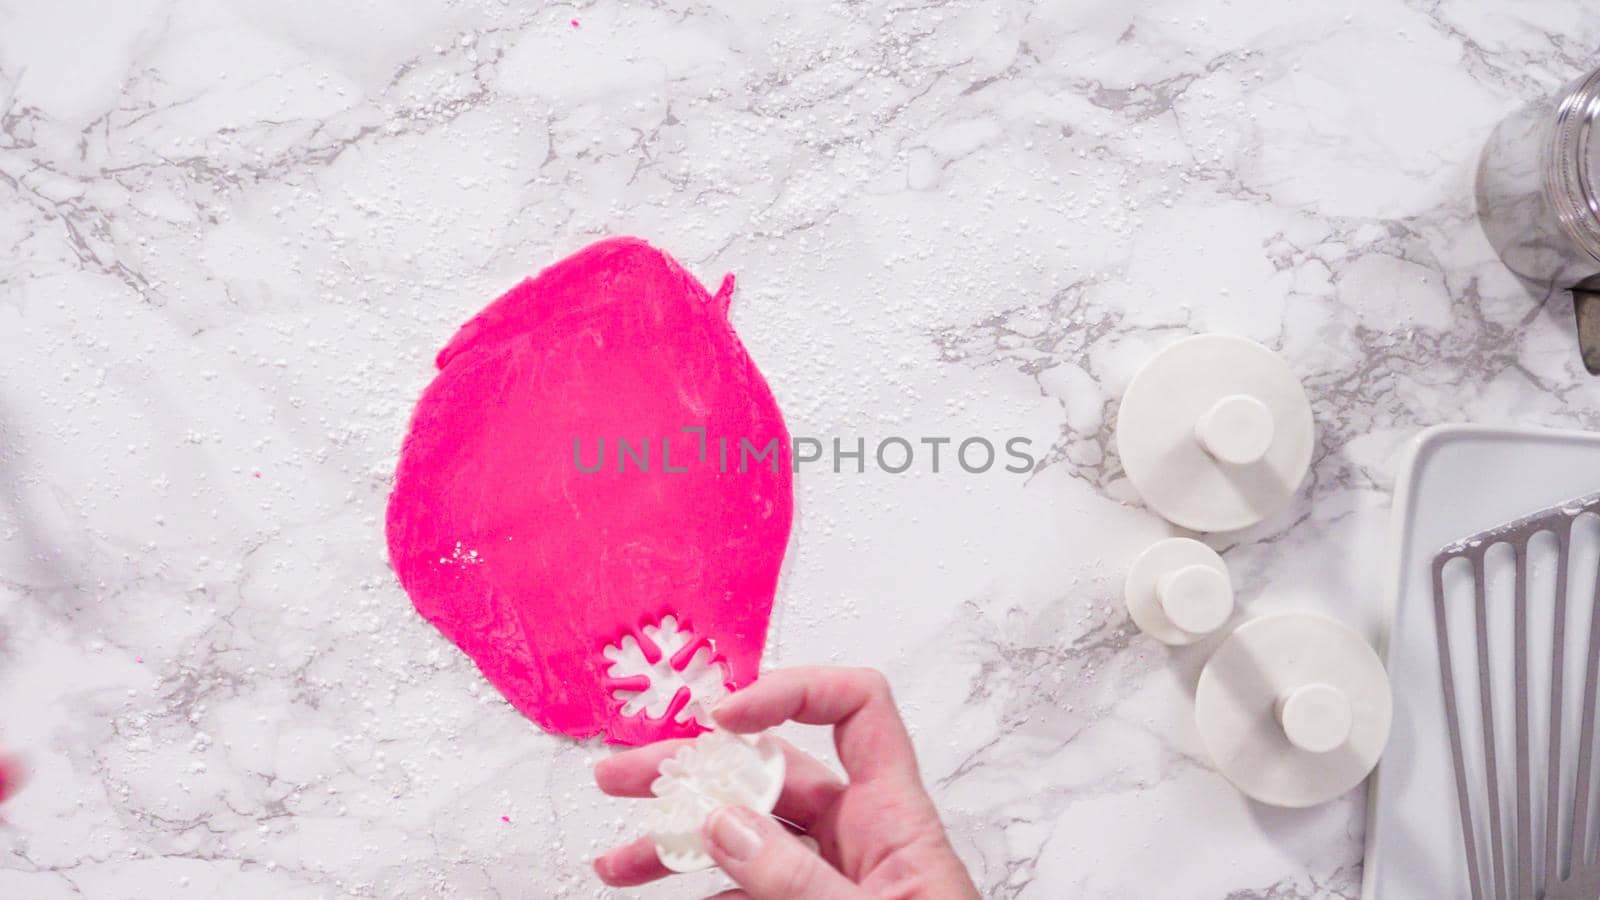 Flat lay. Step by step. Cutting out snowflakes with cookie cutters out of pink fondant on a marble counter.